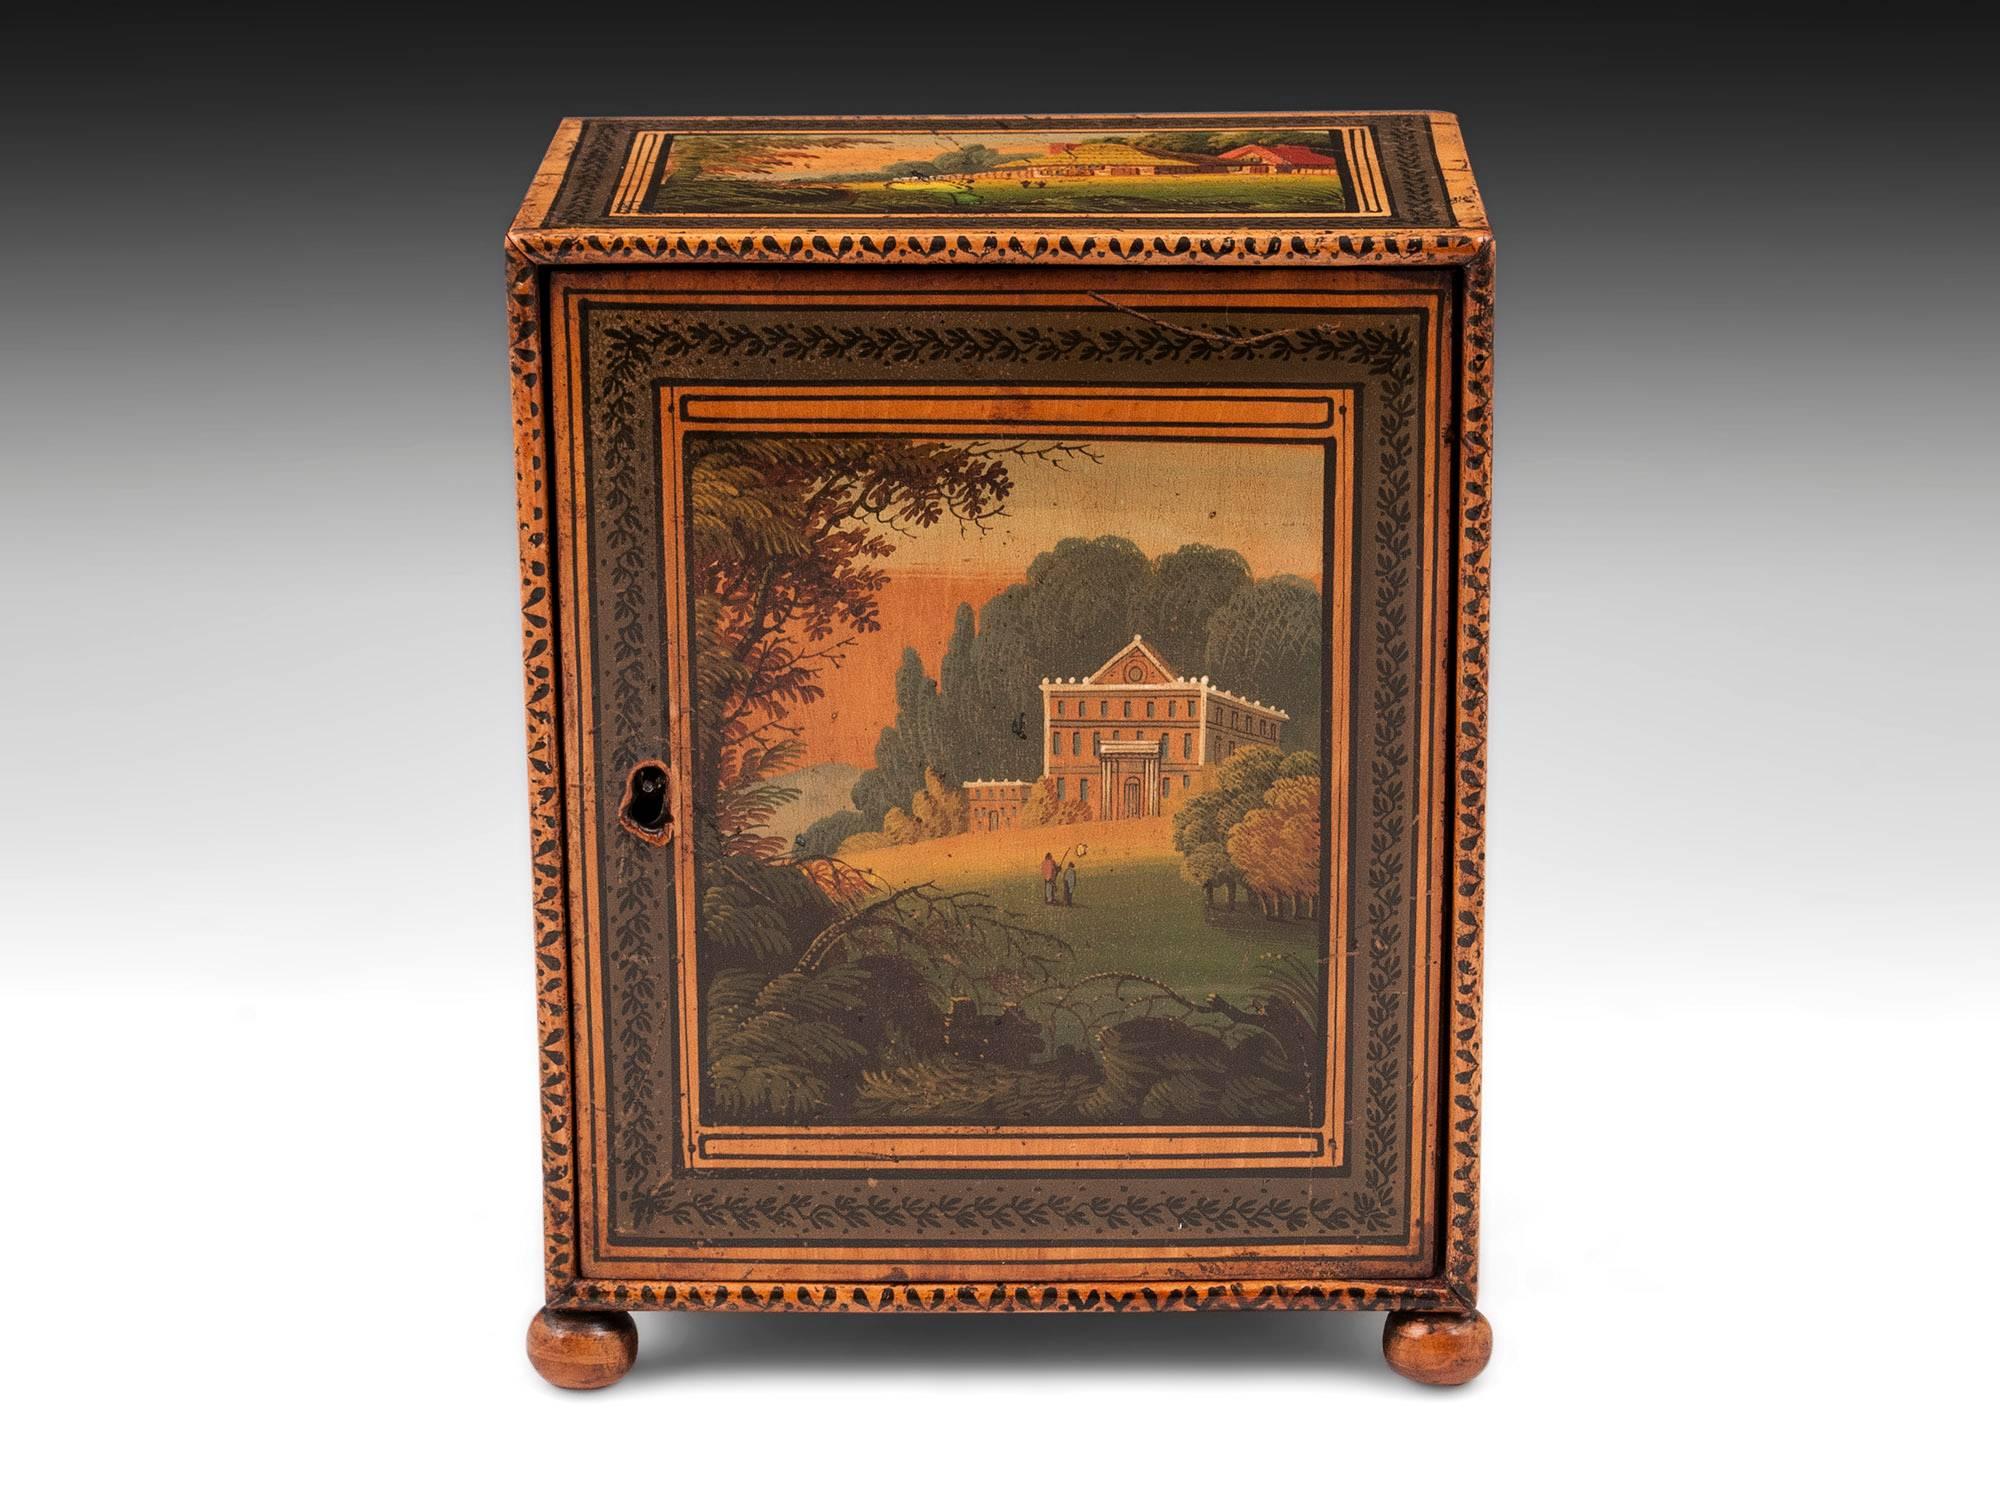 A charming early Tunbridge ware sewing cabinet with finely detailed painted landscape scenes to the front, sides and top. Stands on four turned wooden bun feet. The door opens to reveal three drawers, each paper-lined and with a turned bone handle.